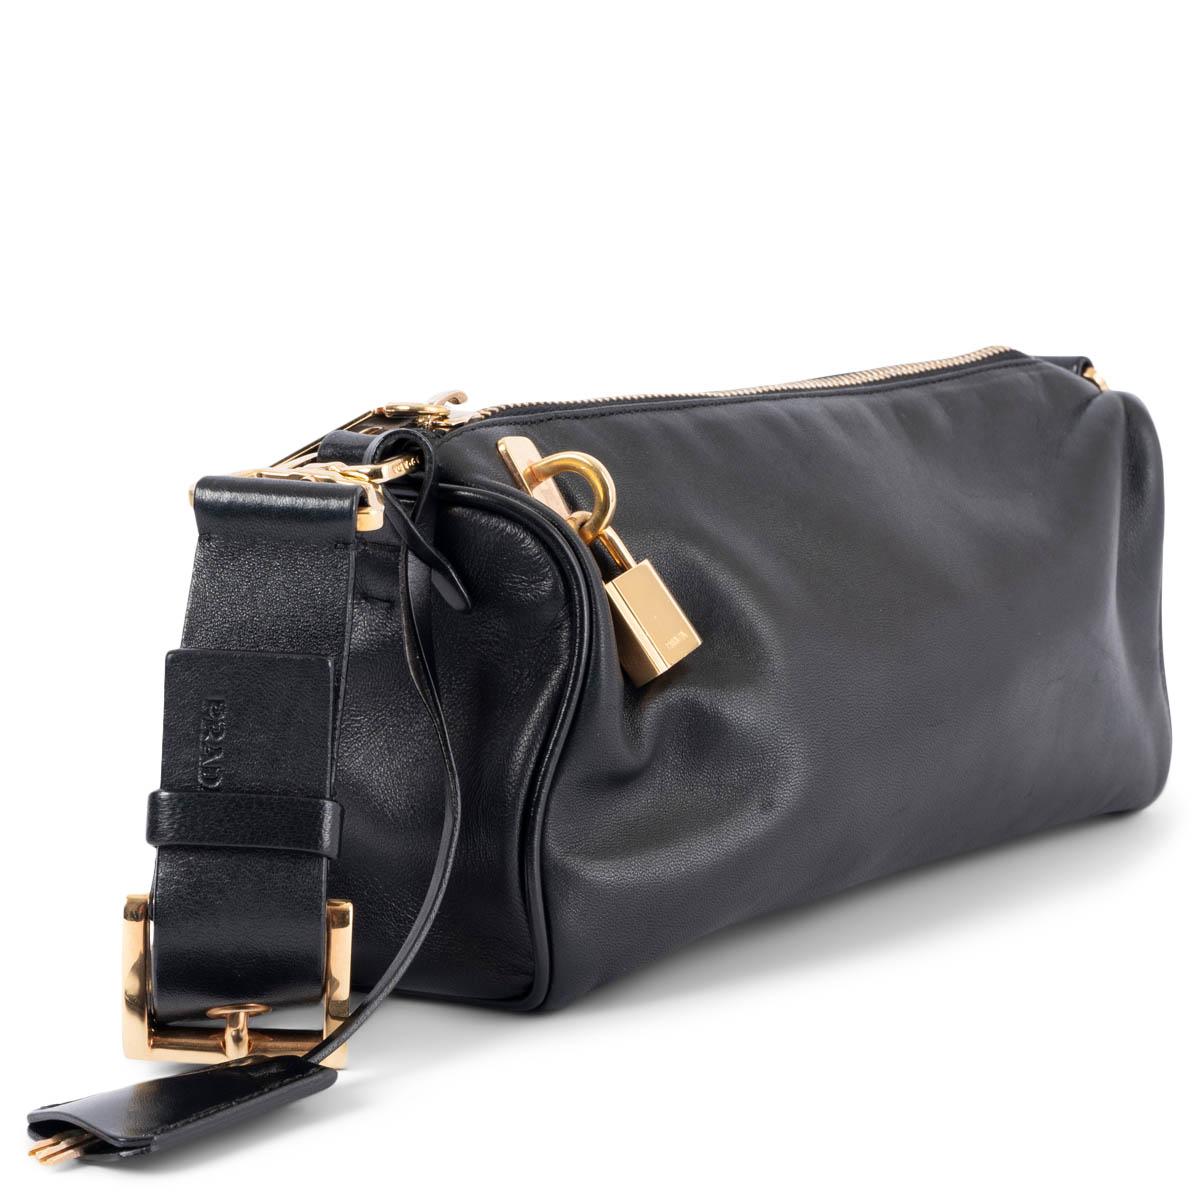 100% authentic Prada boxy shoulder bag in black smooth lambskin featuring gold-tone hardware. Open with a top zip to a logo nylon lined interior with a zipper pocket against the back. Has been carried and is in excellent condition. Comes with lock,